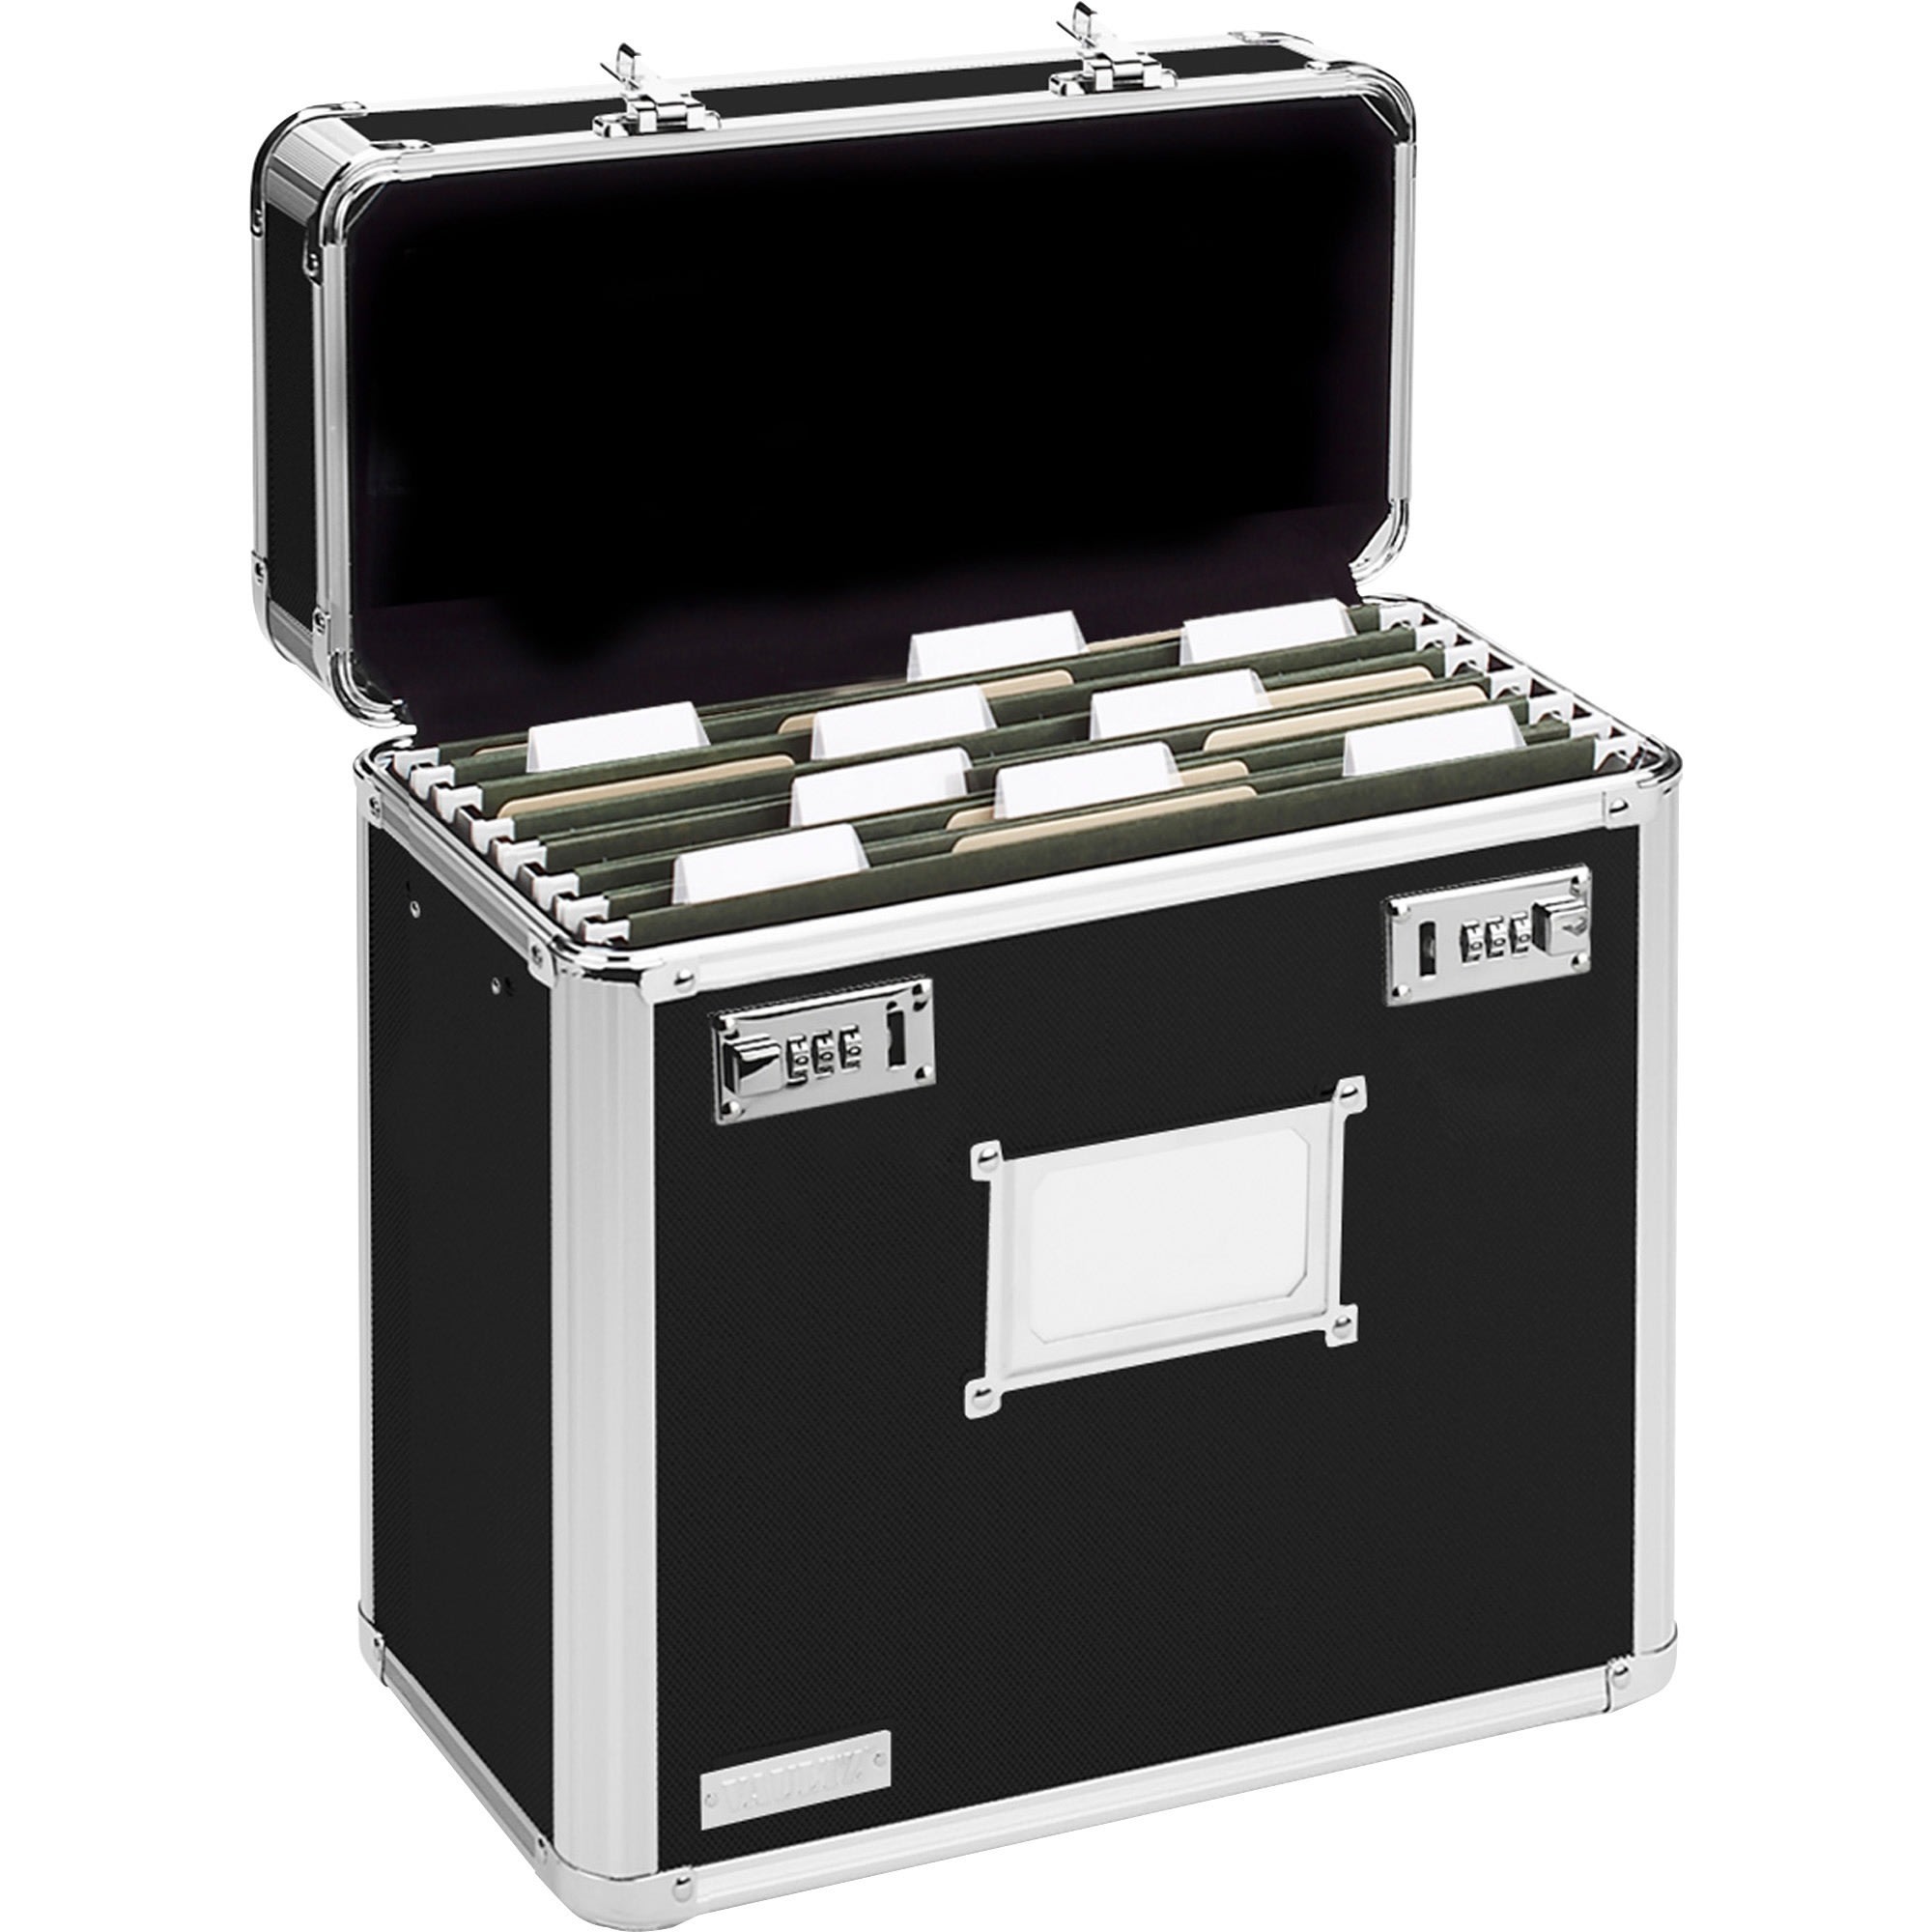 Locking File Boxes Chest Letter Files, 13.75" x 7.25" x 12.25", Black - image 3 of 3